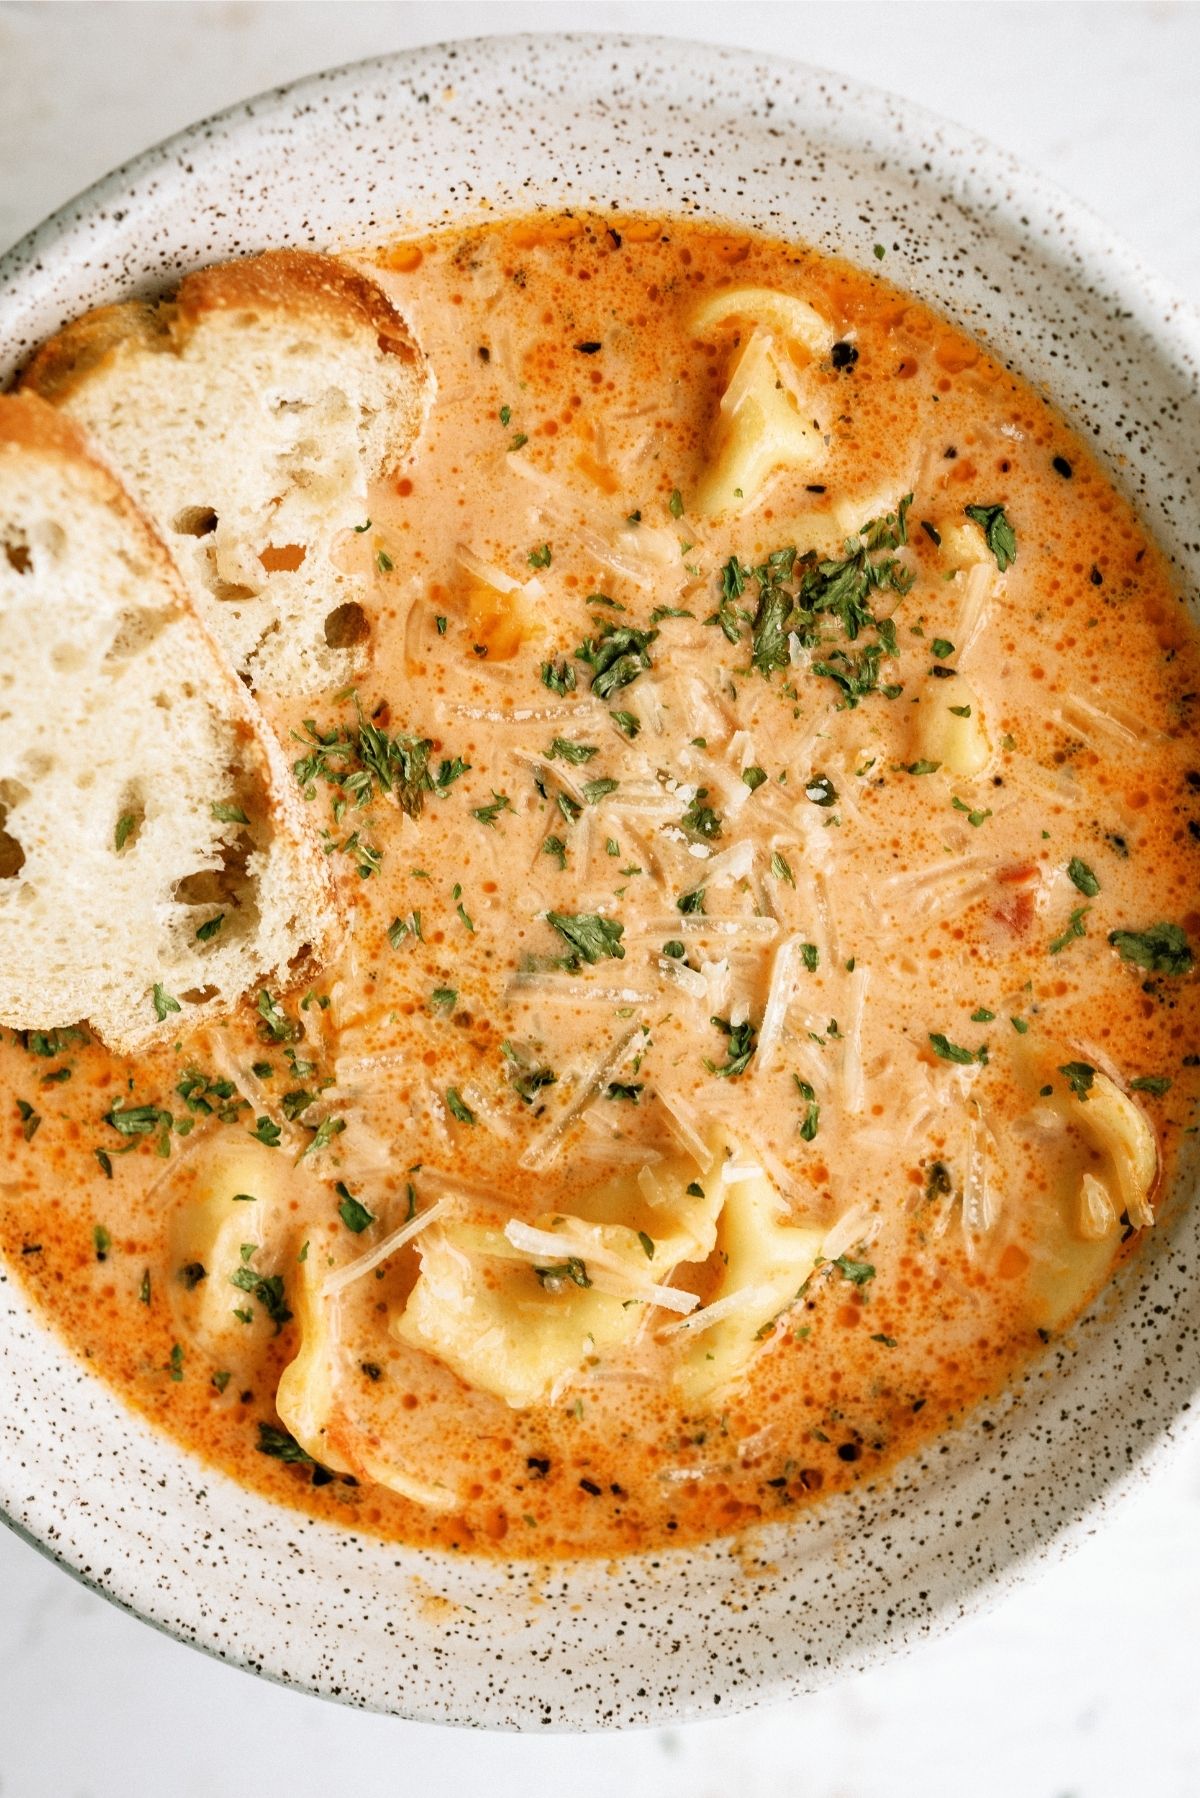 Tomato Tortellini Soup in a bowl served with slices of bread